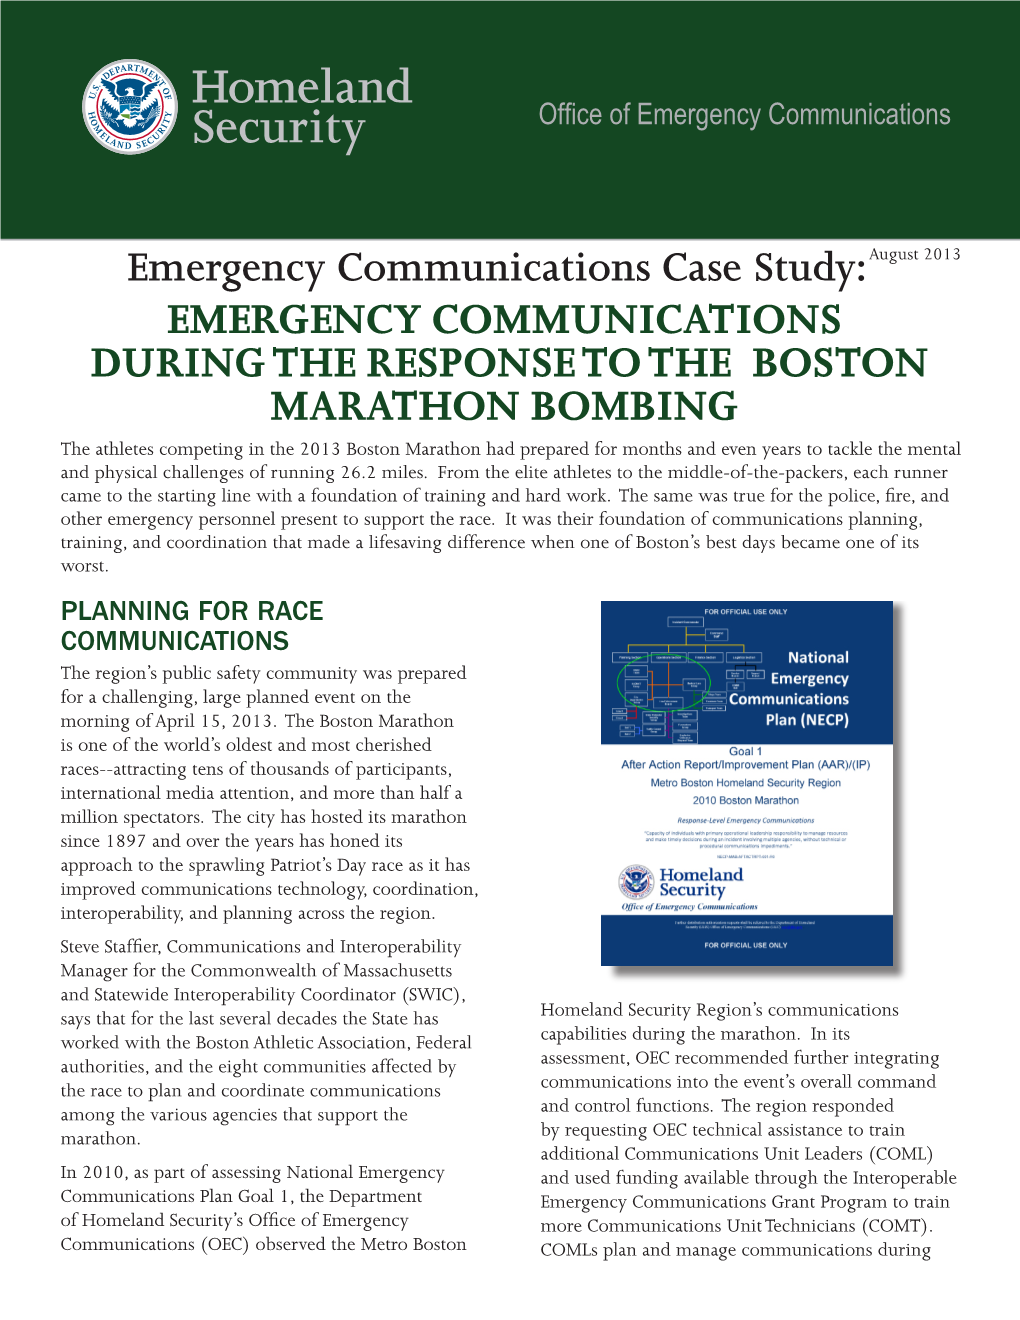 Emergency Communications During the Response to the Boston